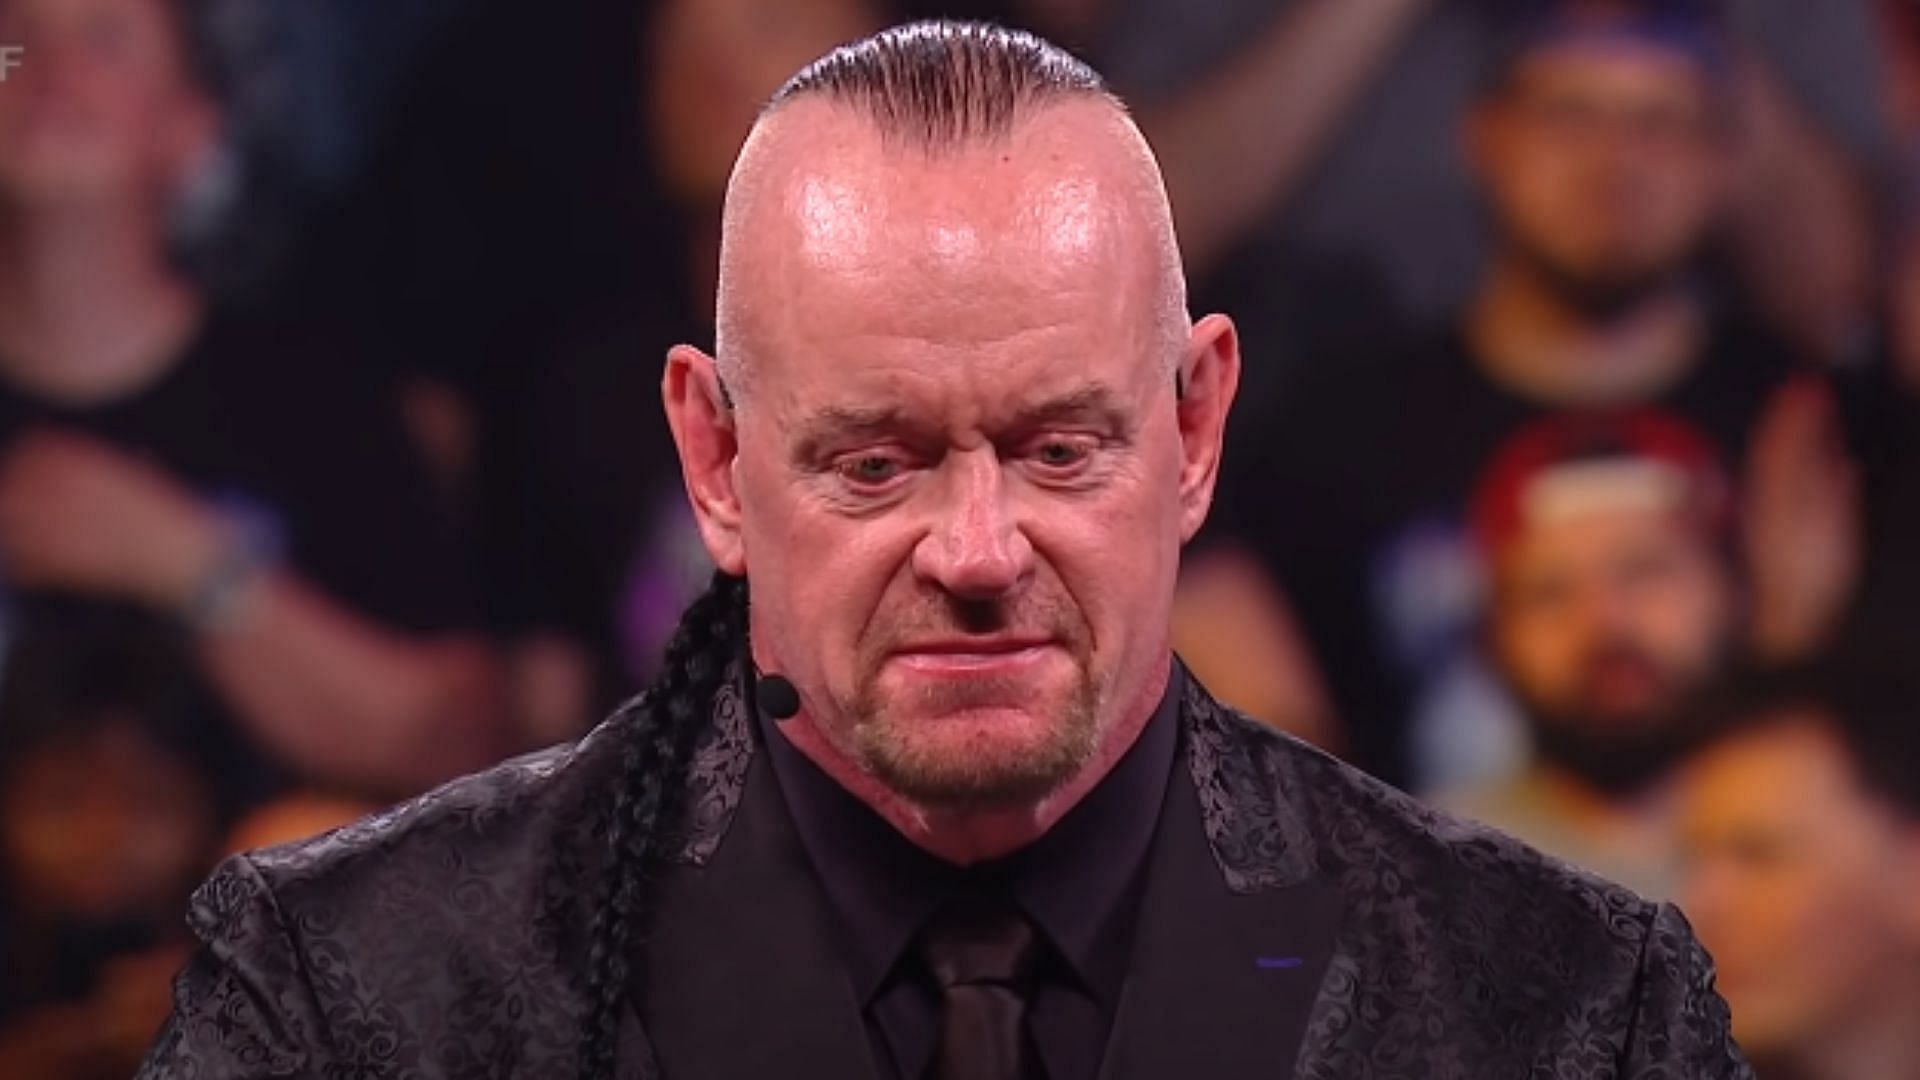 Undertaker is a WWE Hall of Famer